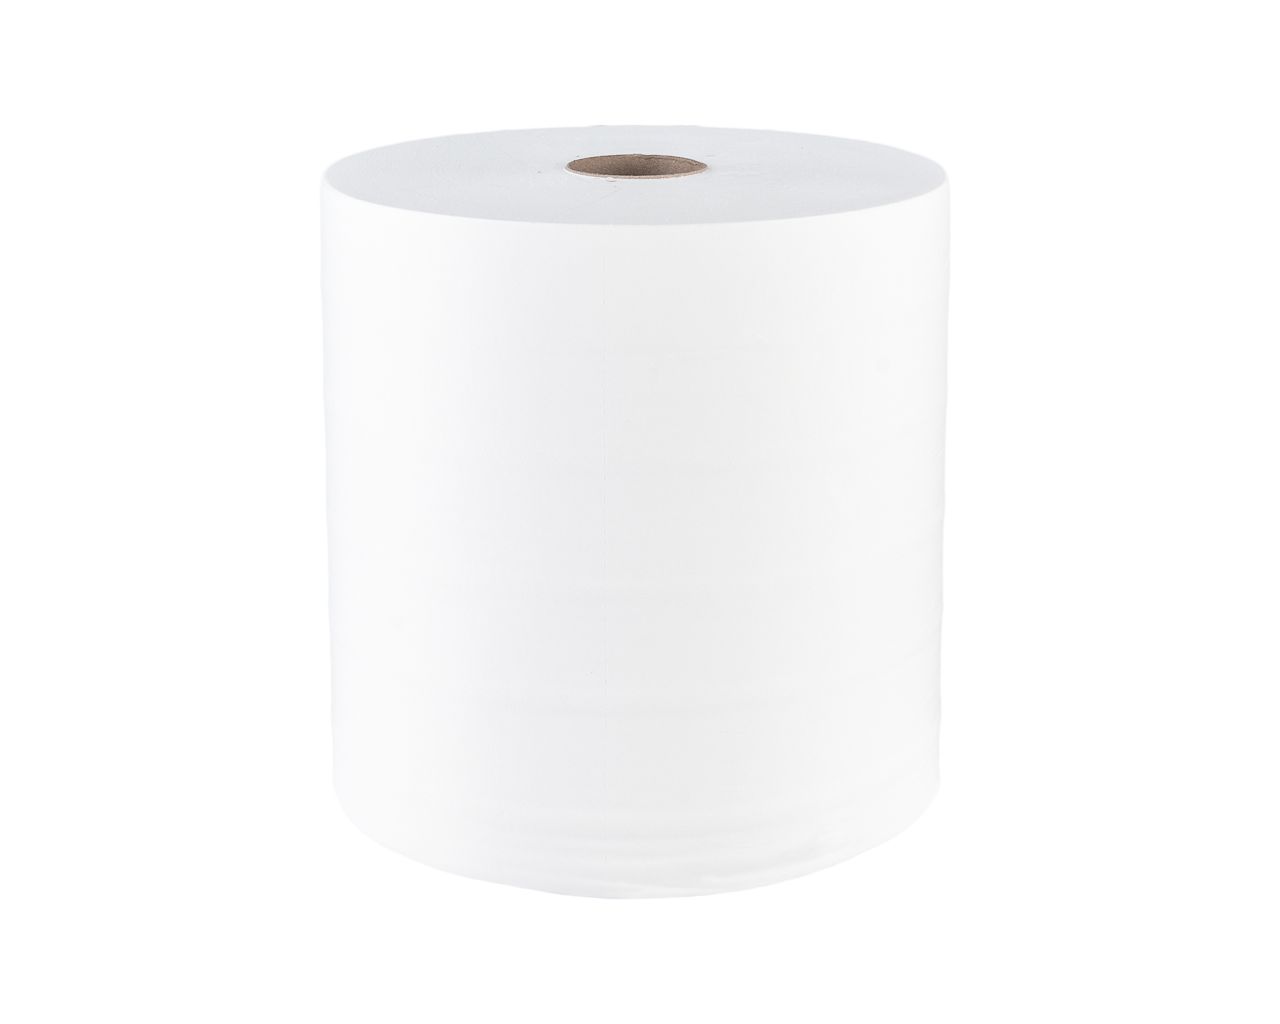 MERIDA TOP - industrial towels, white, 2 -ply, 100% cellulose, 410 m, (2 pcs. / pack.)